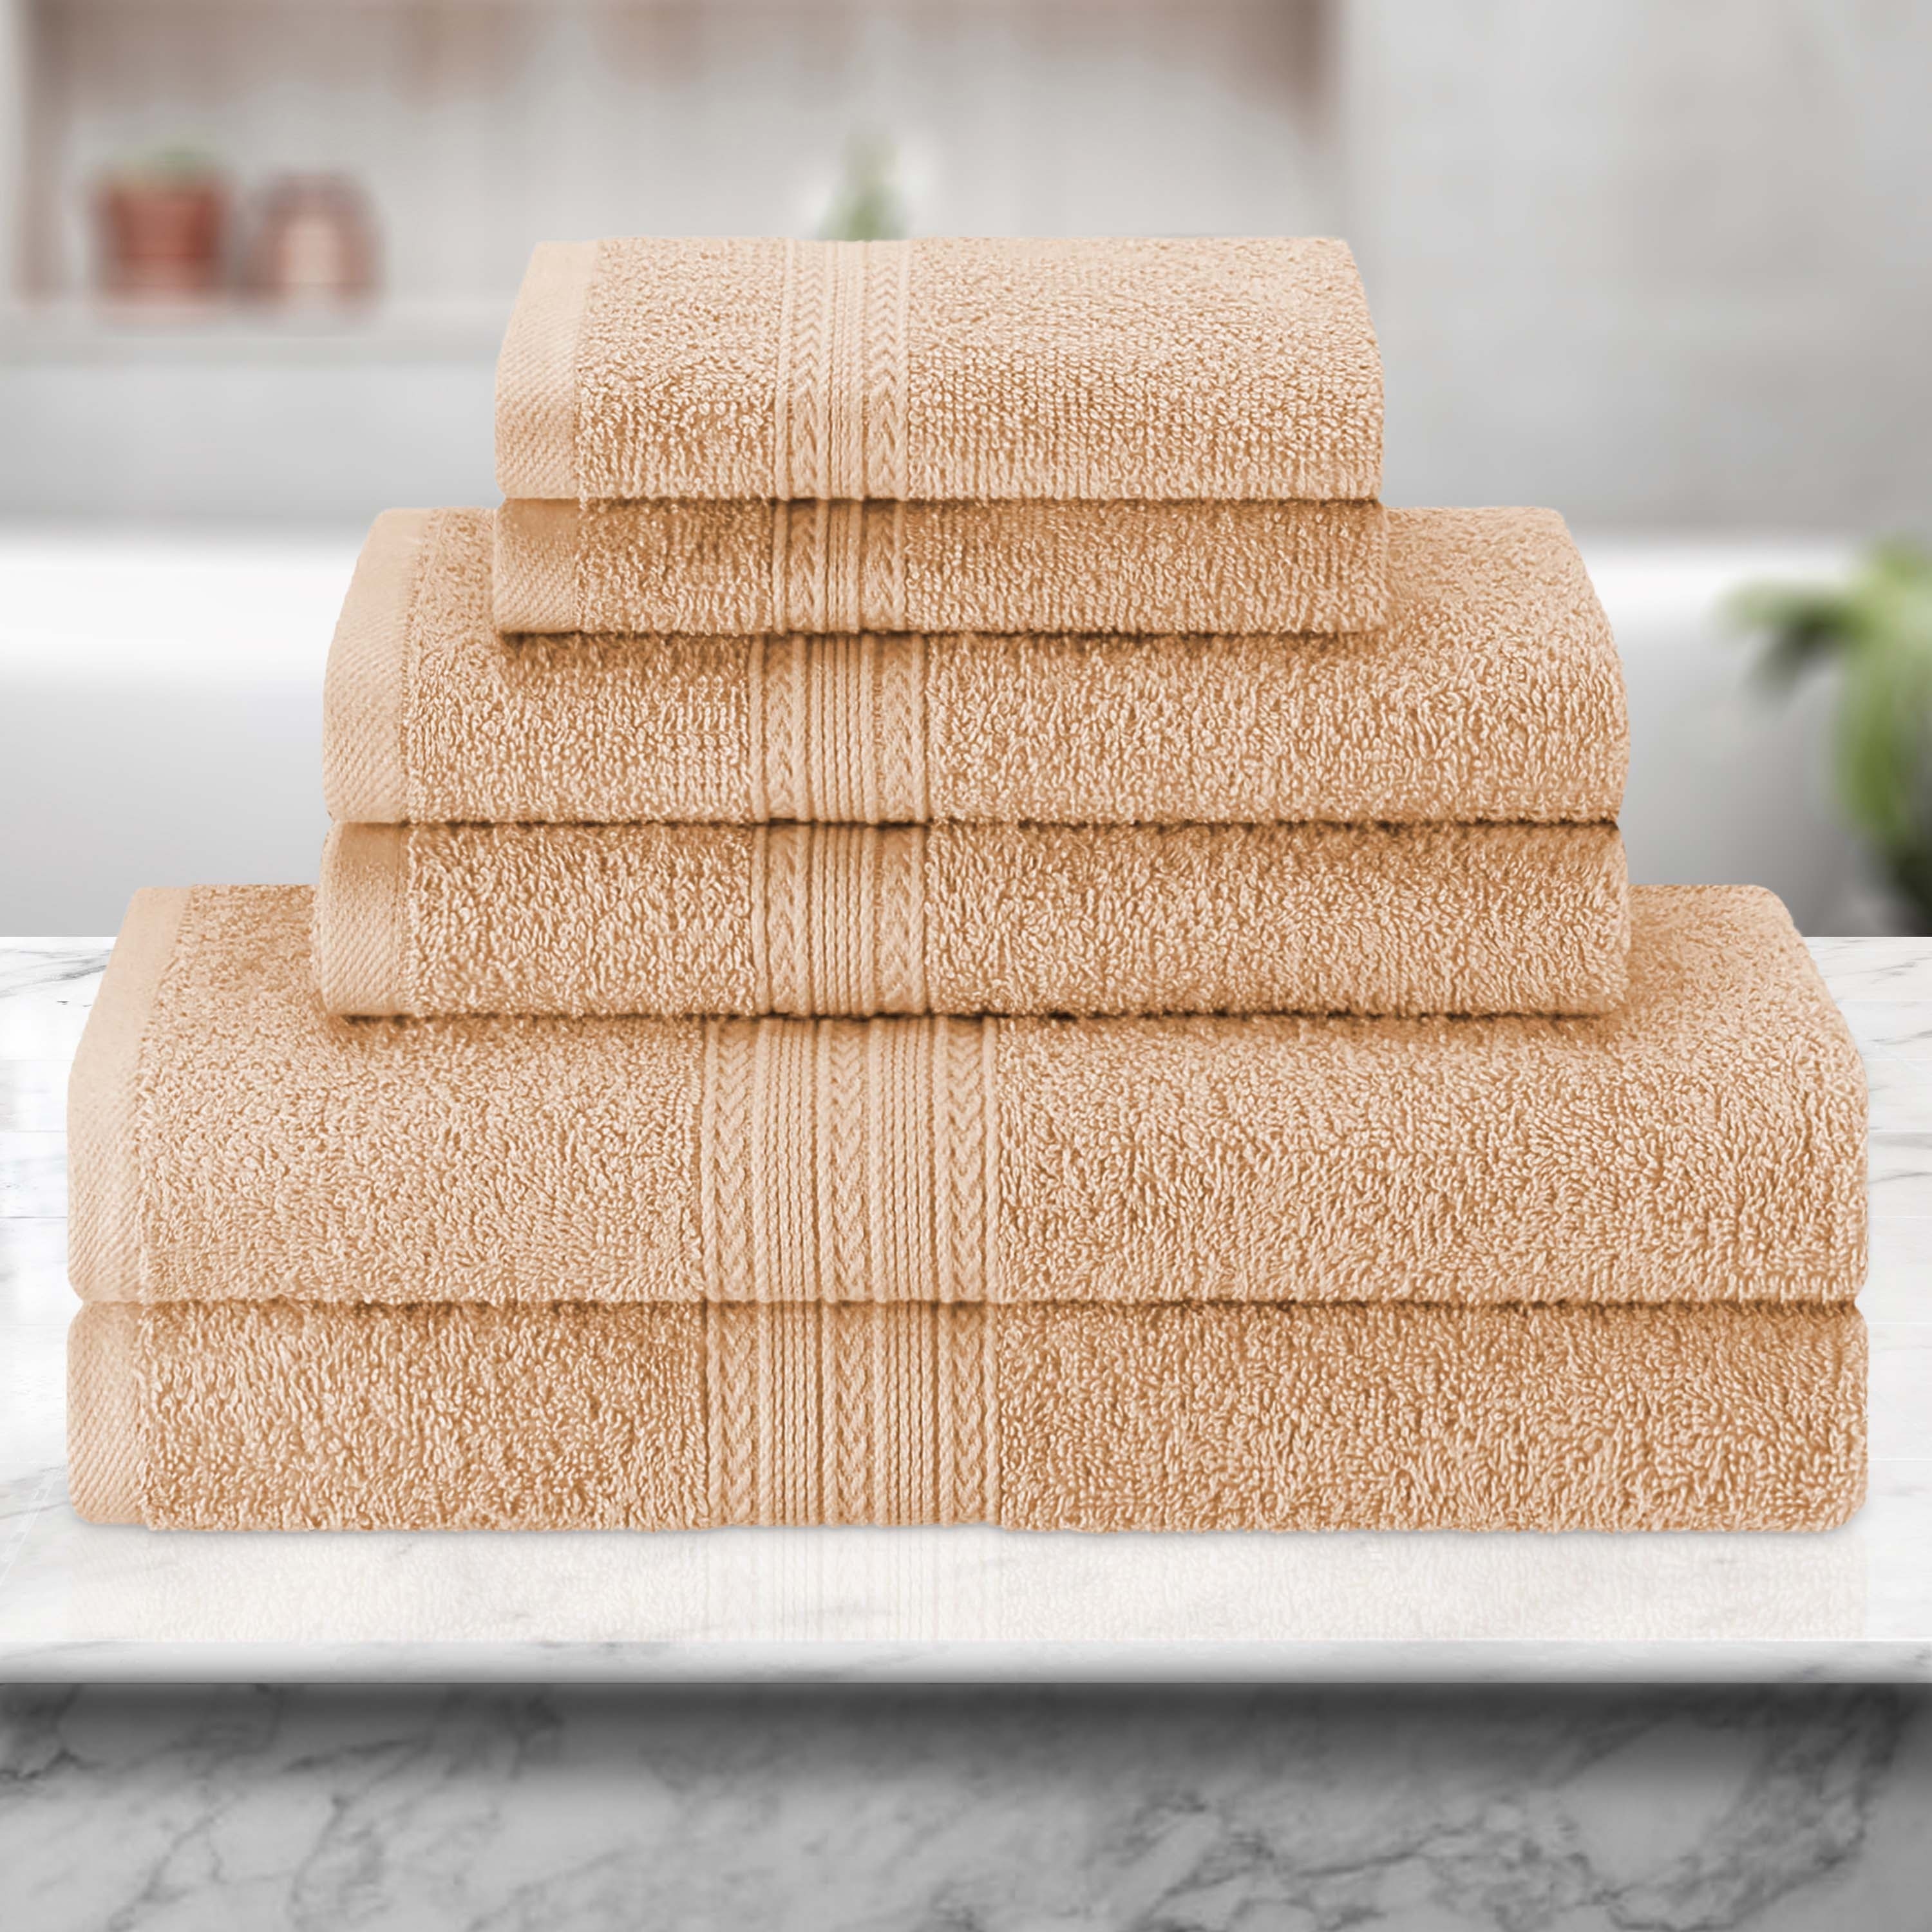 https://ak1.ostkcdn.com/images/products/is/images/direct/1c4d42d6776ebb8f9f8244662adbc8d46c28f4ae/Eco-Friendly-Sustainable-Cotton-Bathroom-Towel-Set-of-6-by-Superior.jpg